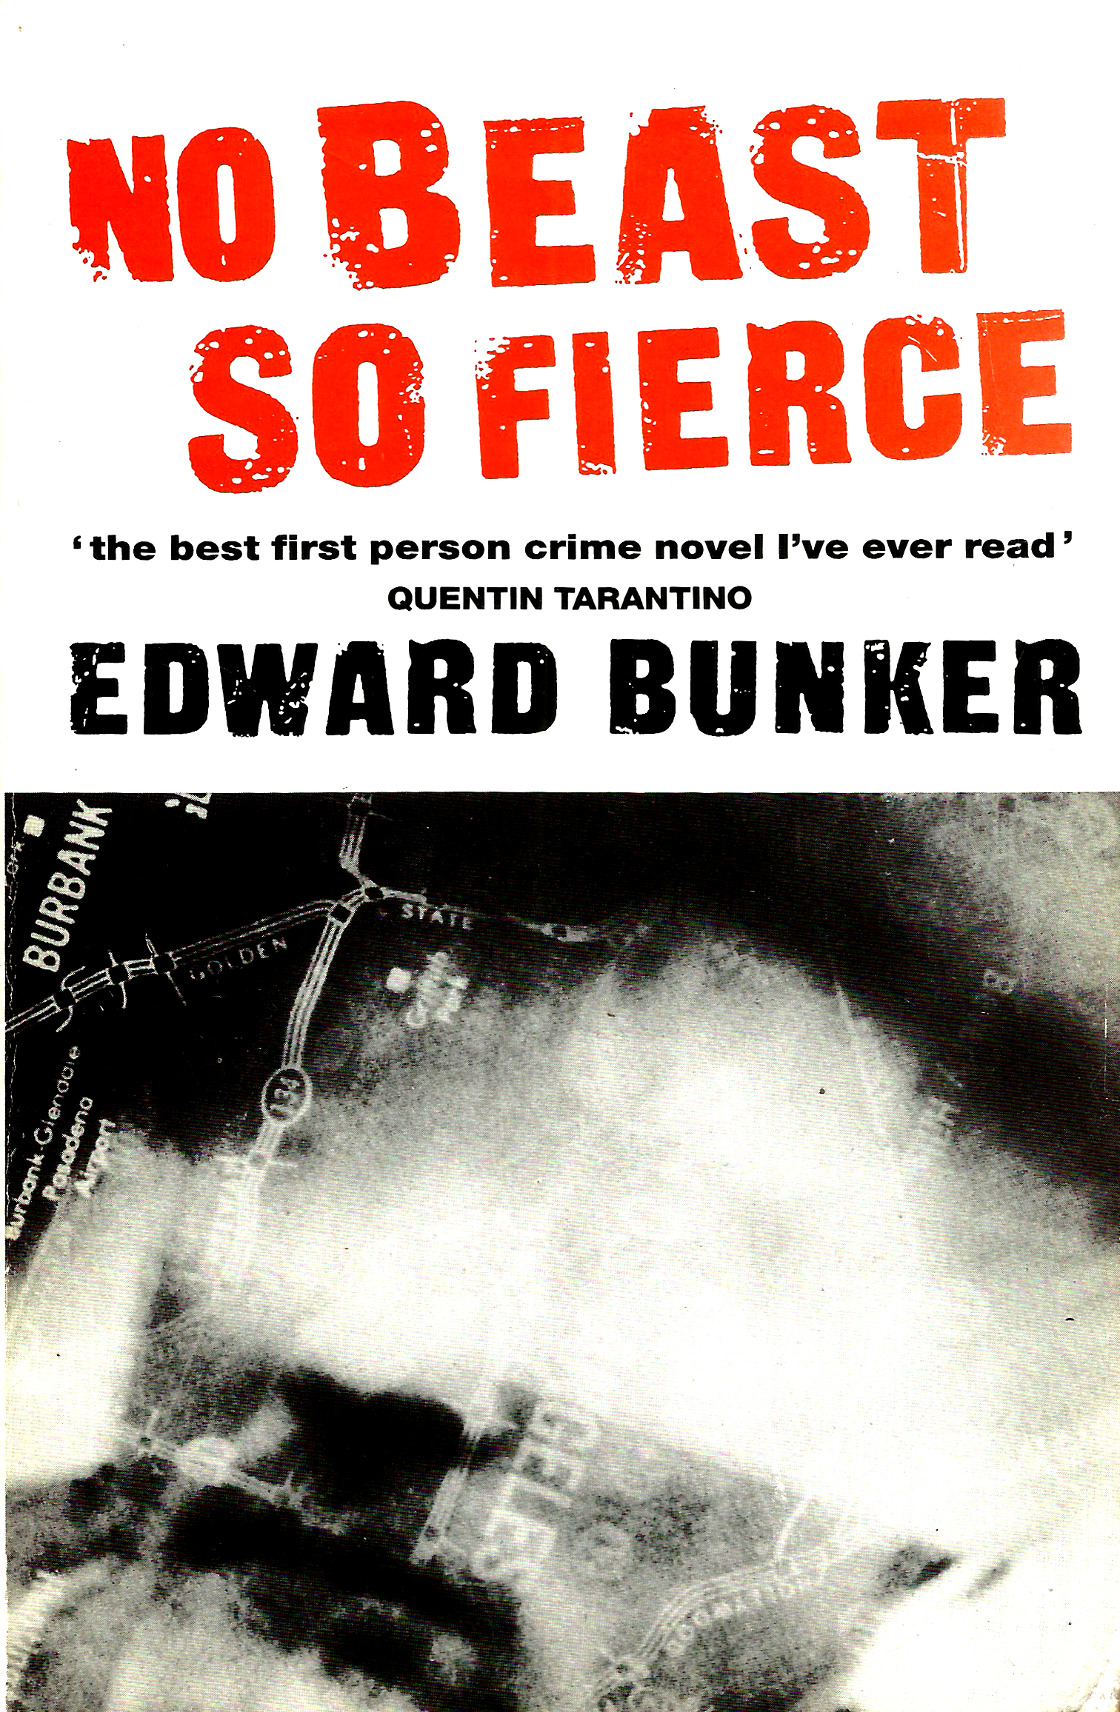 No Beast So Fierce, by Edward Bunker (No Exit Press, 1993). From a charity shop in